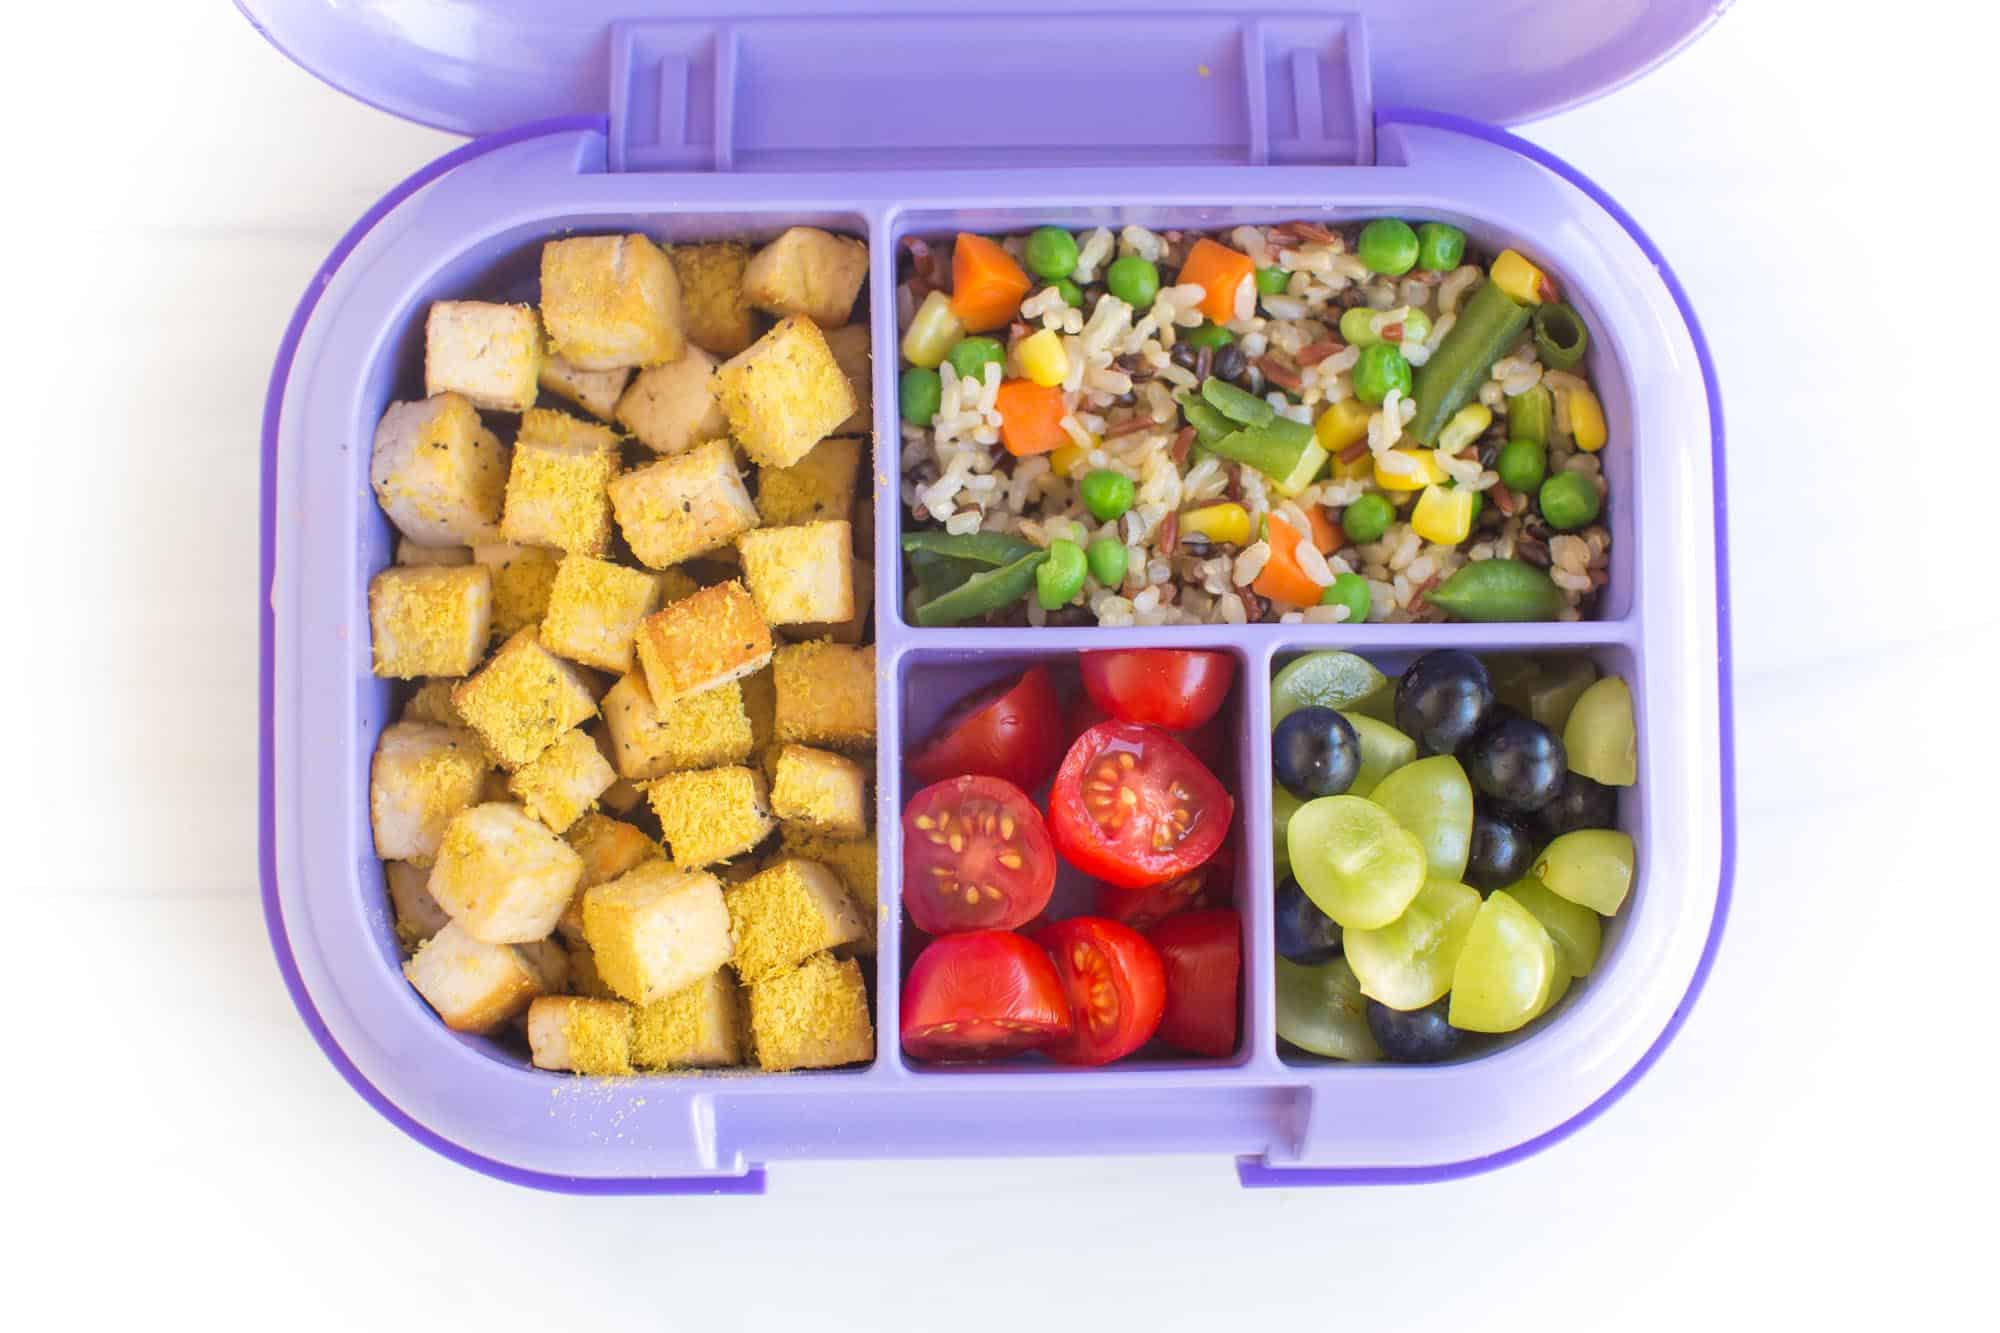 Nooch Tofu With Whole Grain Rice and Veggies Vegan School Lunch Ideas for Kids